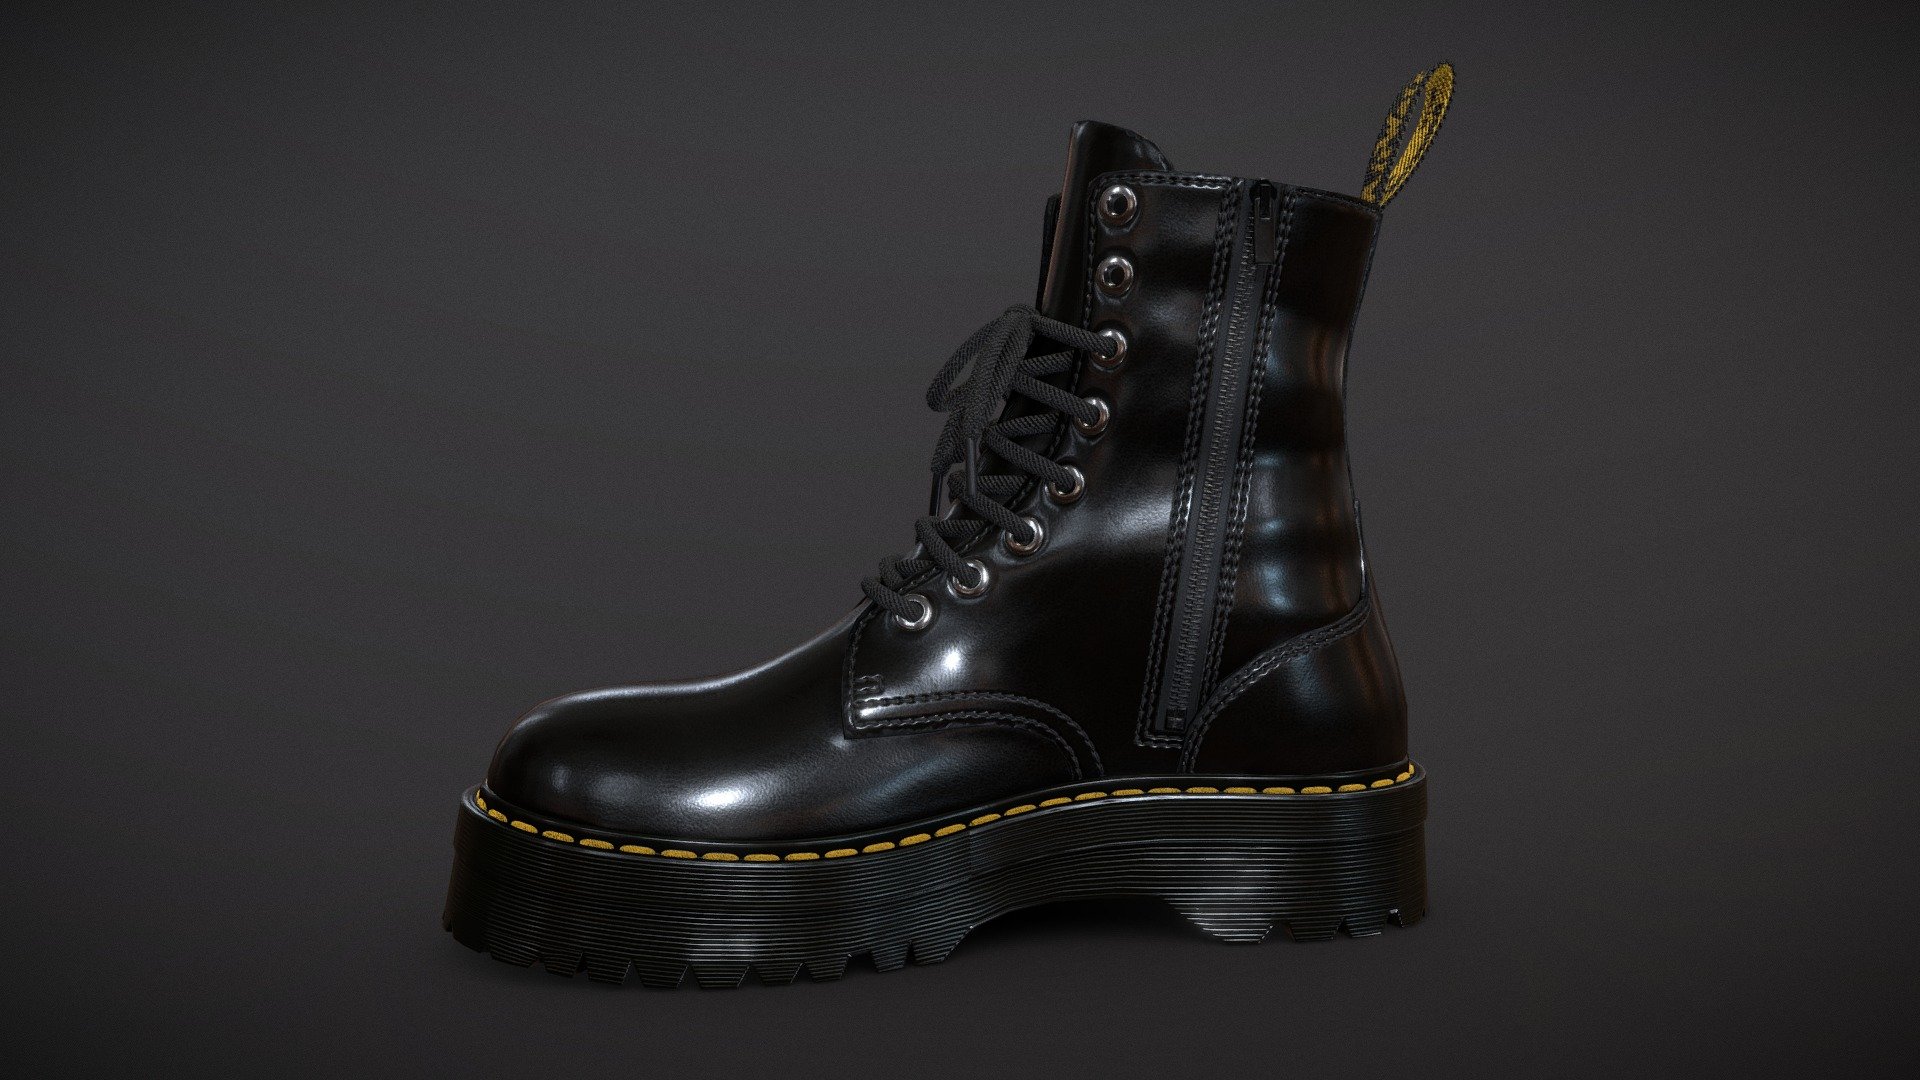 Dr. Martens Jadon Smooth Leather Platform Boots

Game and production ready, polycount optimized for quality, ideal for high quality Characters and Close-Ups
Internal parts modeled and textured, ideal for customization or animation
Laces are continuous, no cuts behind the eyelets

Single UV space
PBR and UE4 4k Textures
Low Poly has 10k quads
FBX, OBJ, ZTL

3 Color Variations
Black / Red / White - Dr Martens Jadon - Buy Royalty Free 3D model by Feds452 3d model